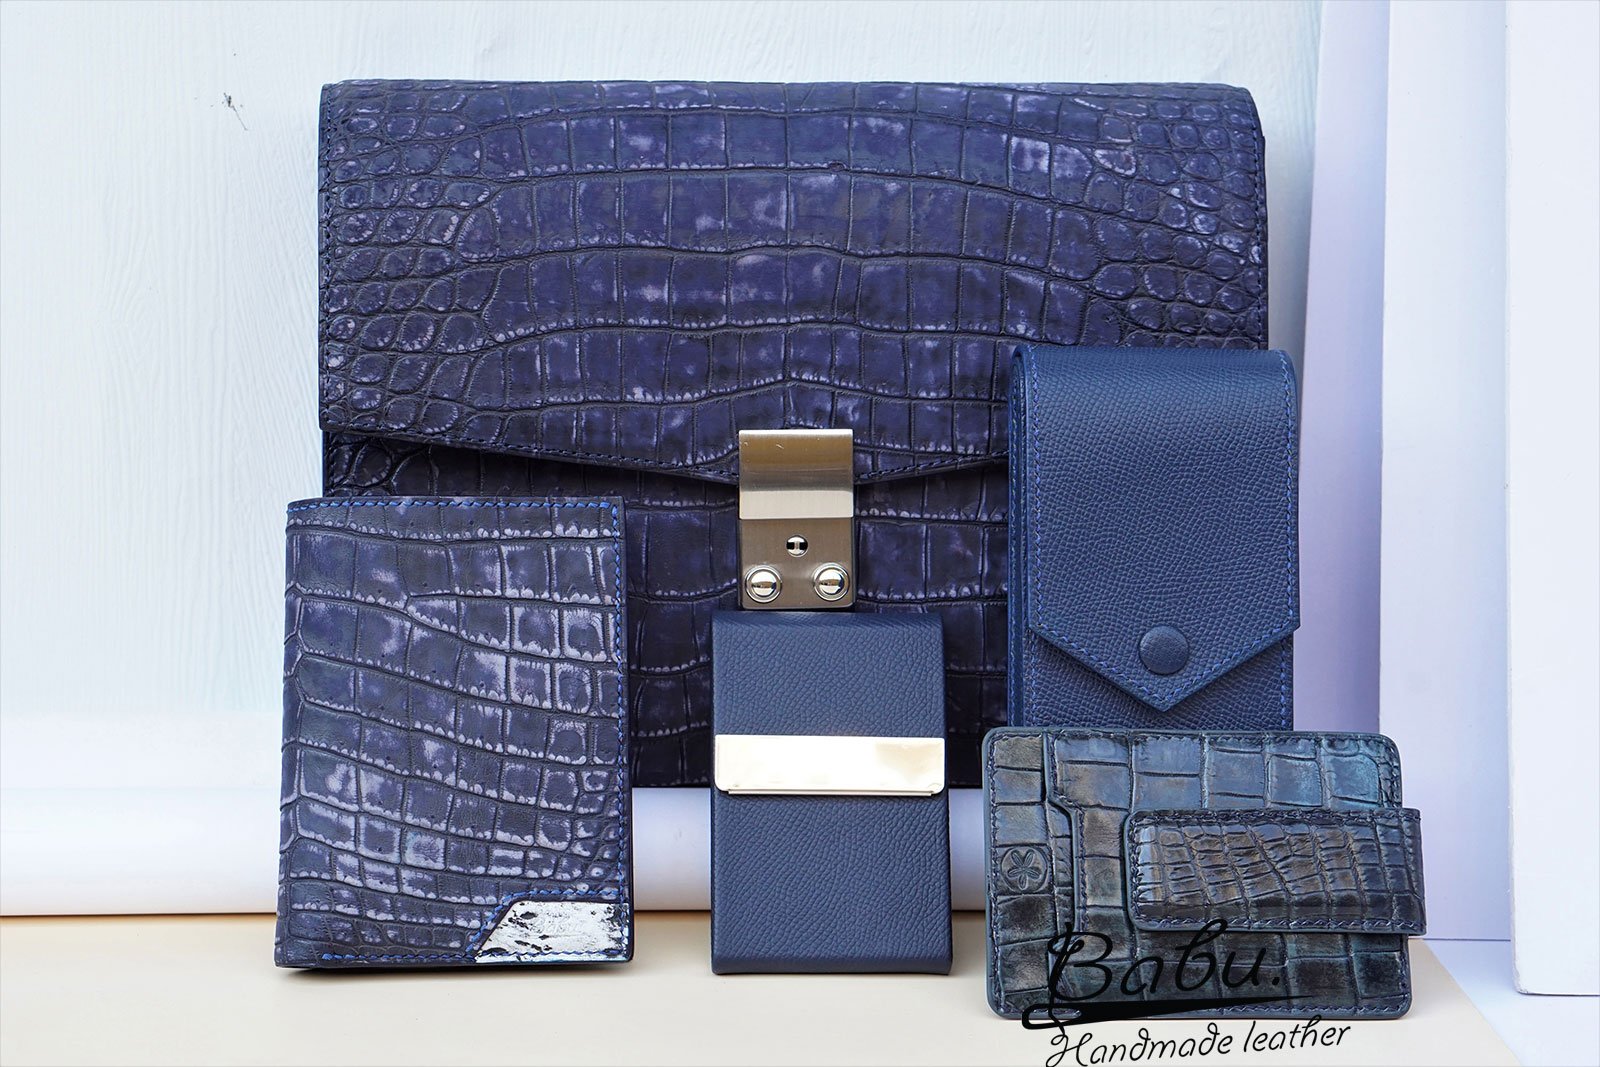 How to maintain alligator leather wallets